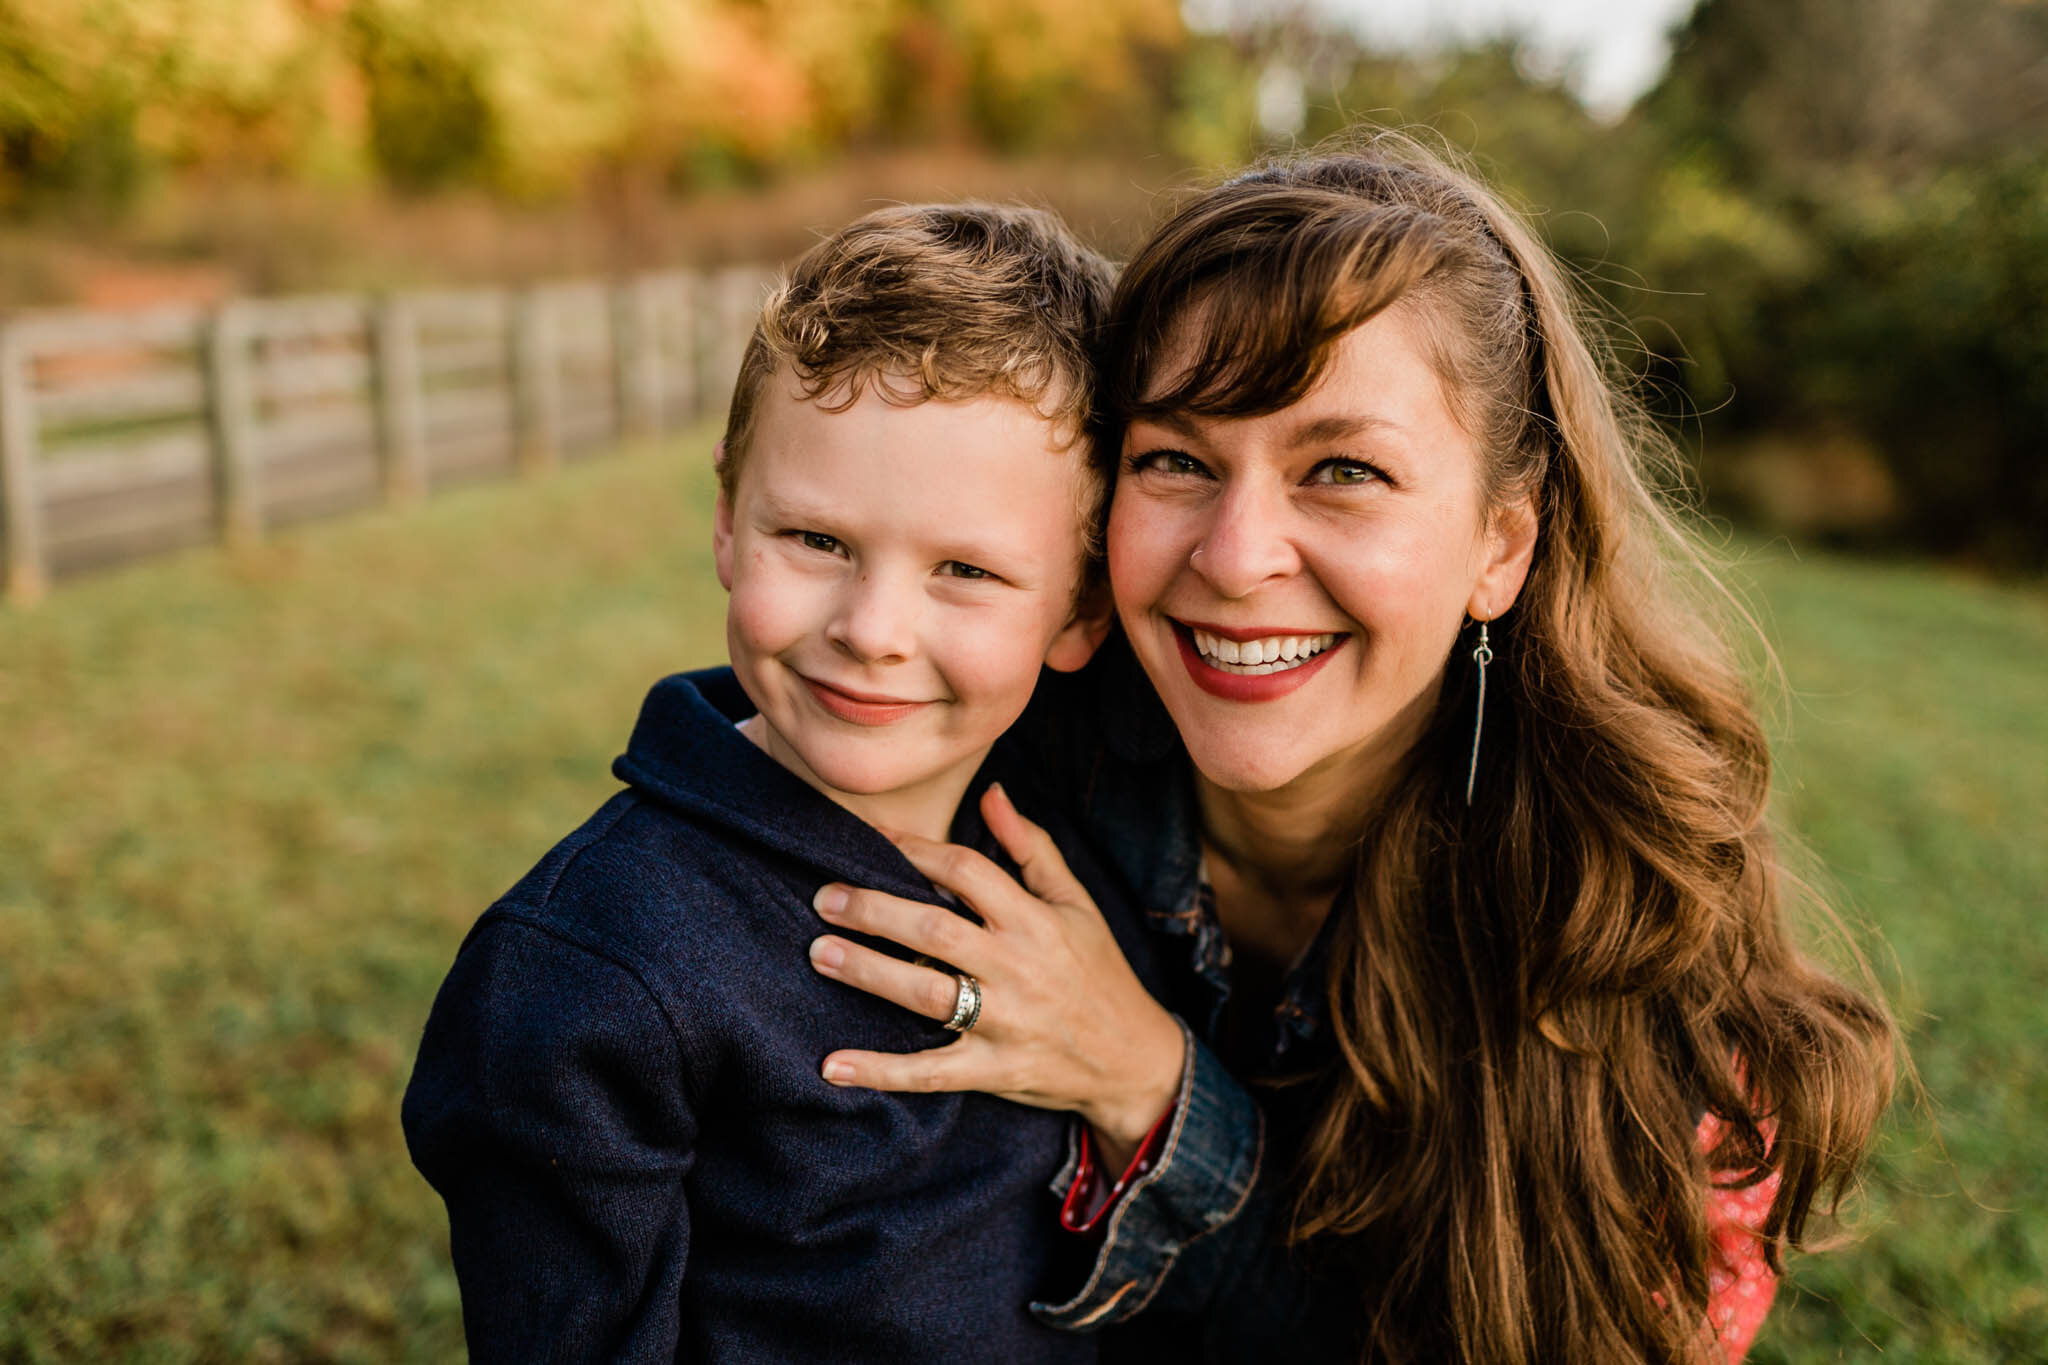 Raleigh Family Photographer | By G. Lin Photography | Umstead Park | Mother hugging son outdoor candid portrait